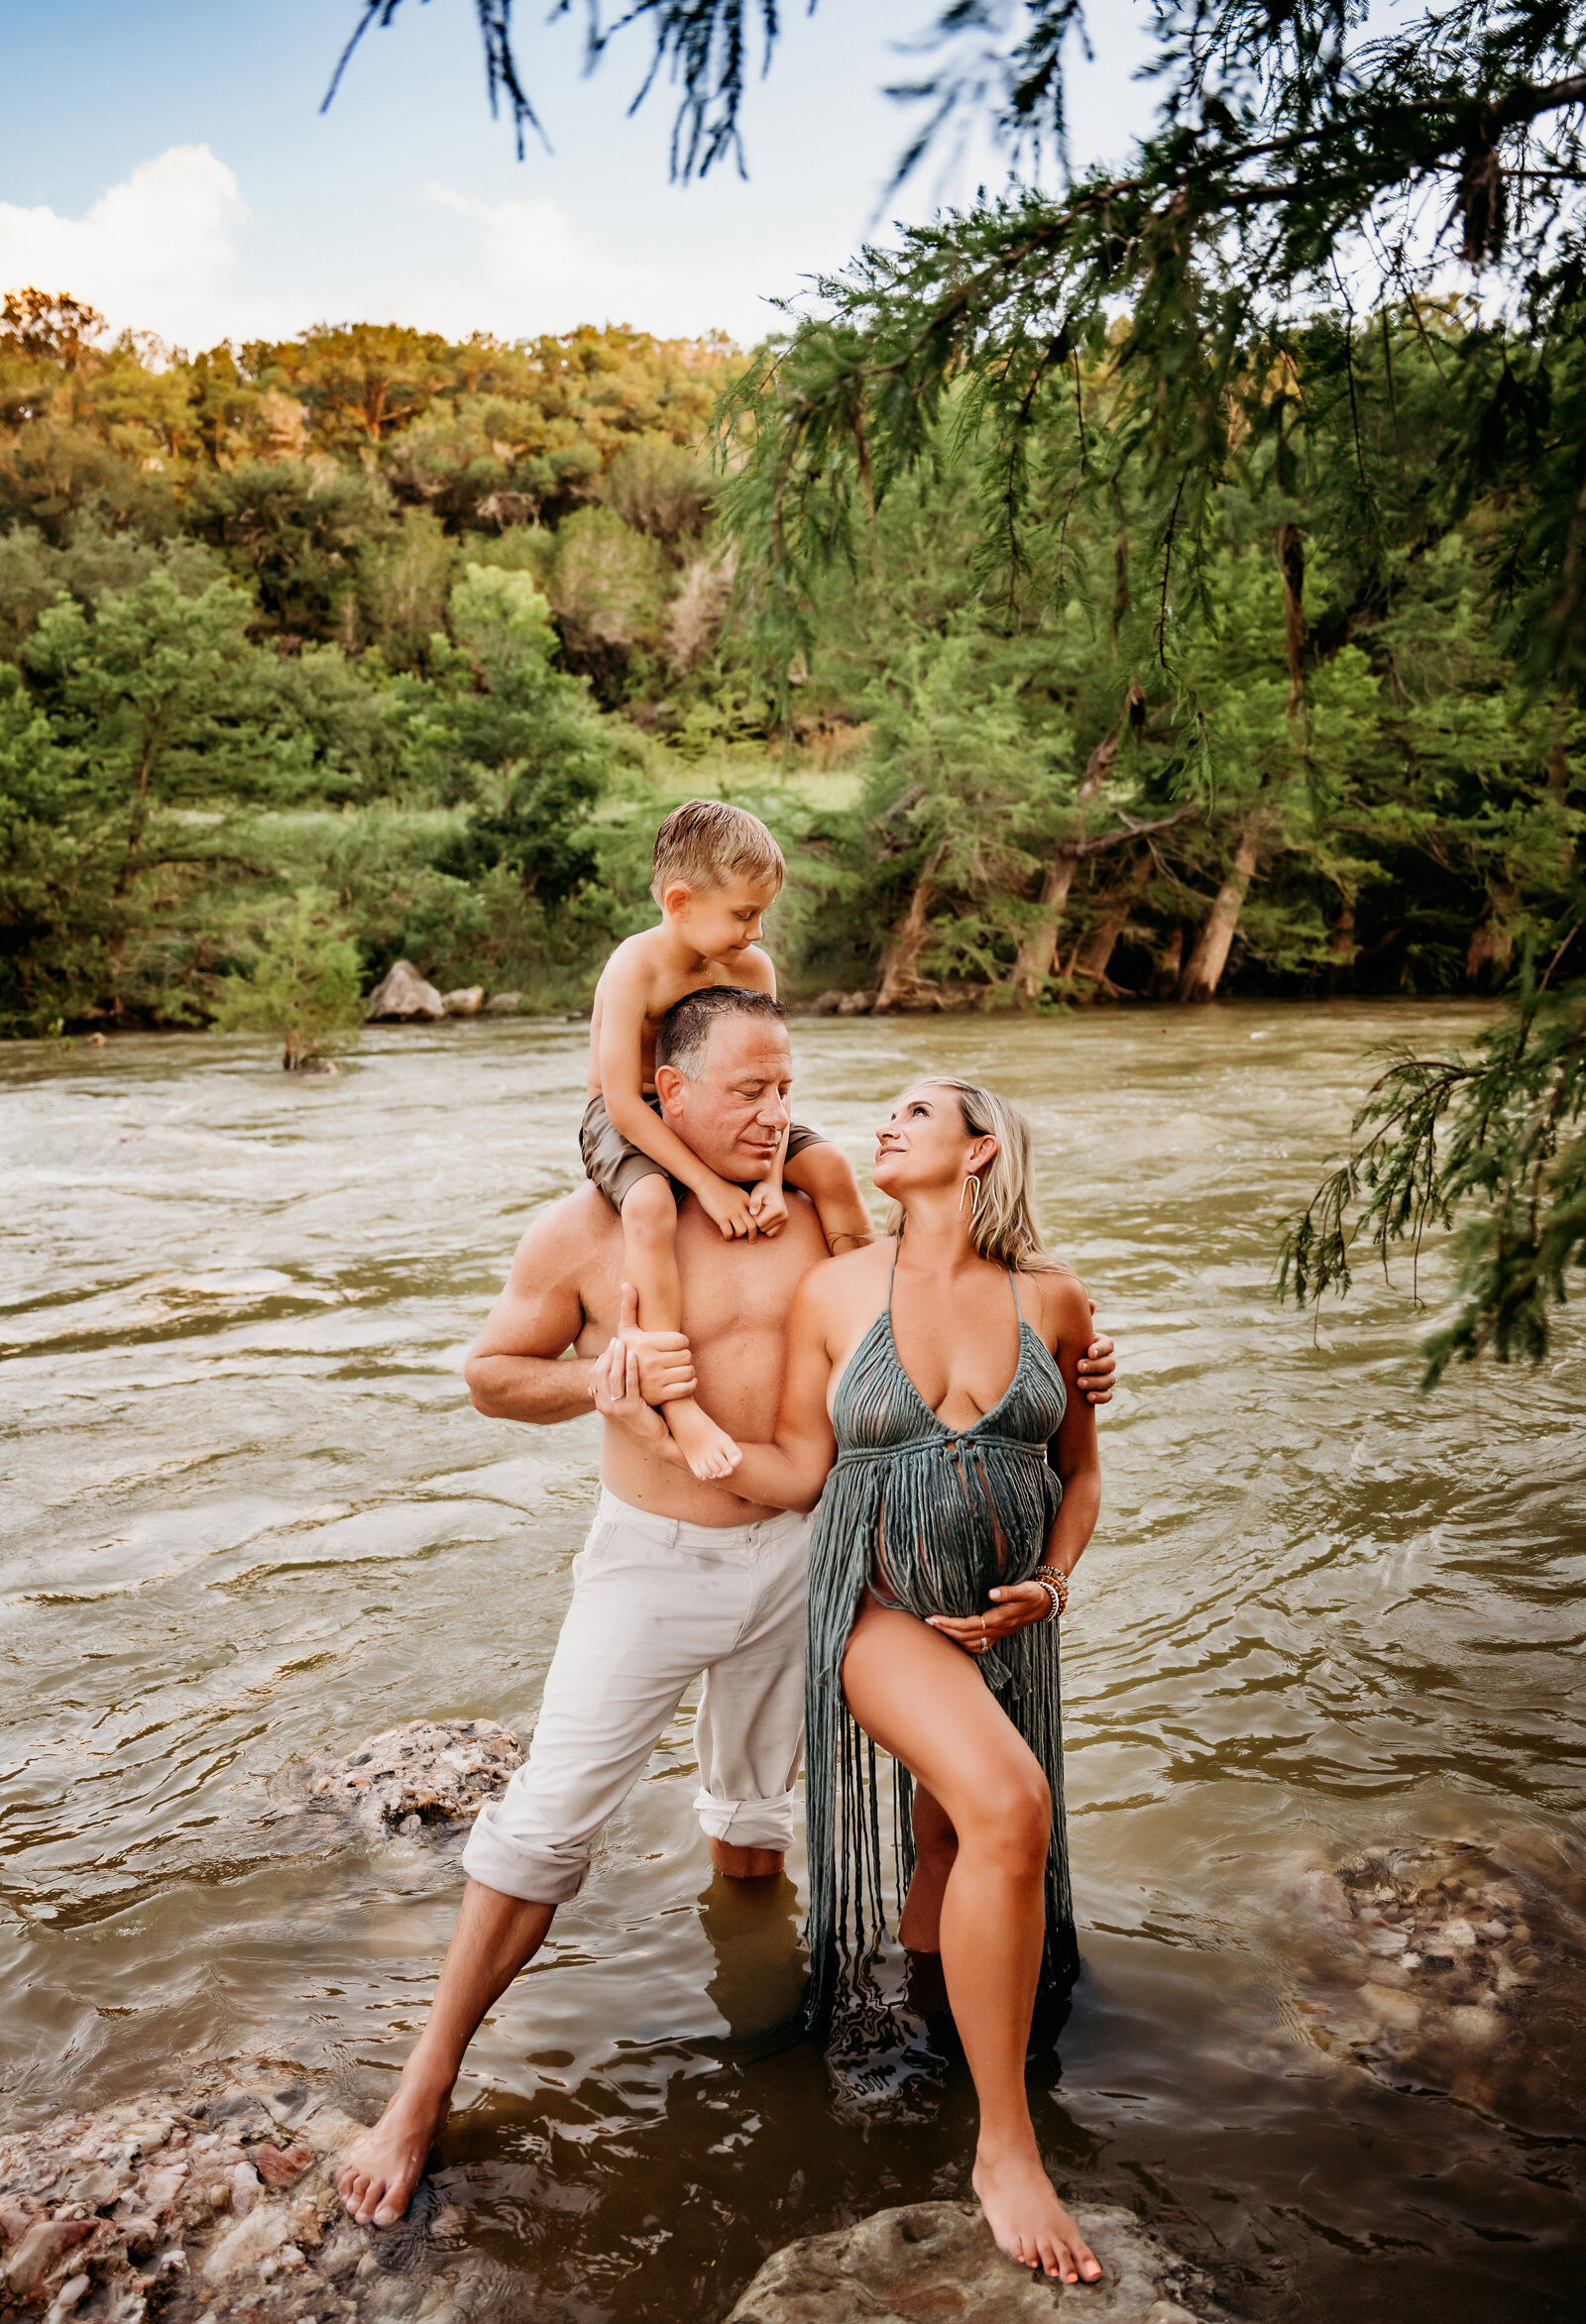 Maternity Photographer, a mother-to-be looks up at her son riding on dad's shoulders at the river